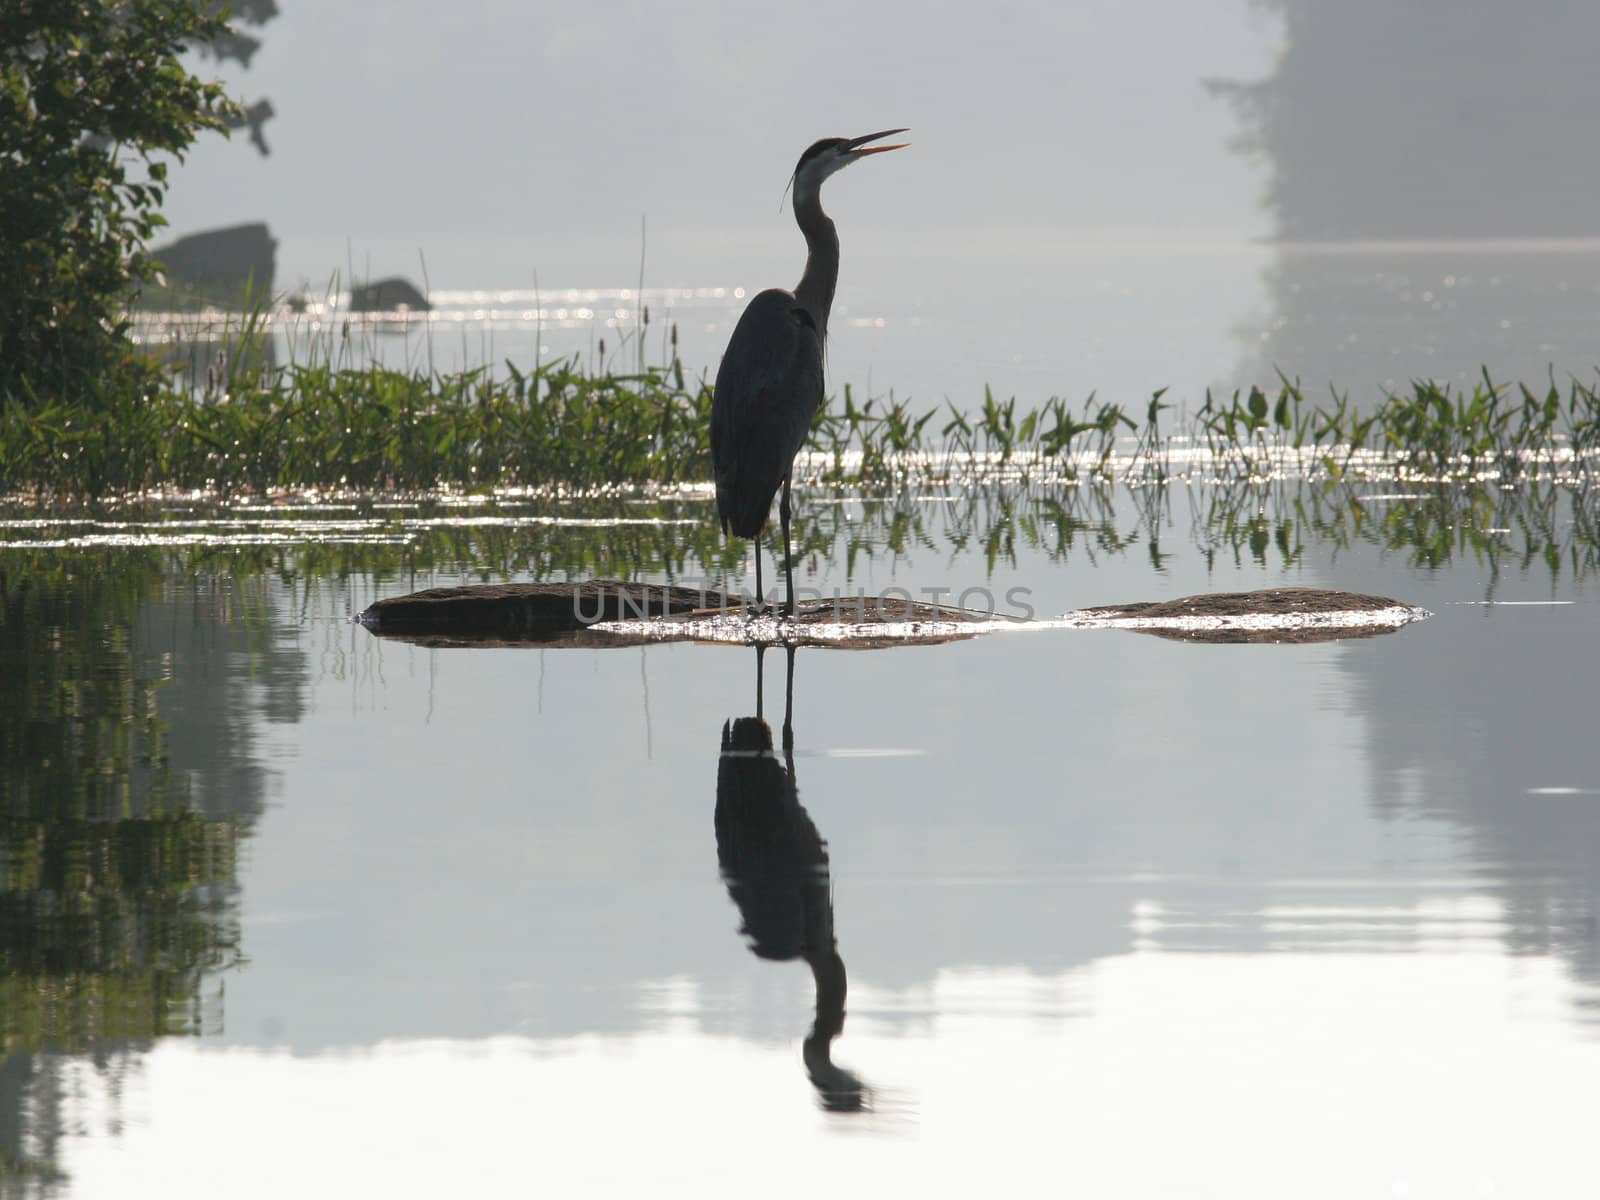 Silhouette of Great Blue Heron with Reflection on a misty morning in Haliburton, Ontario